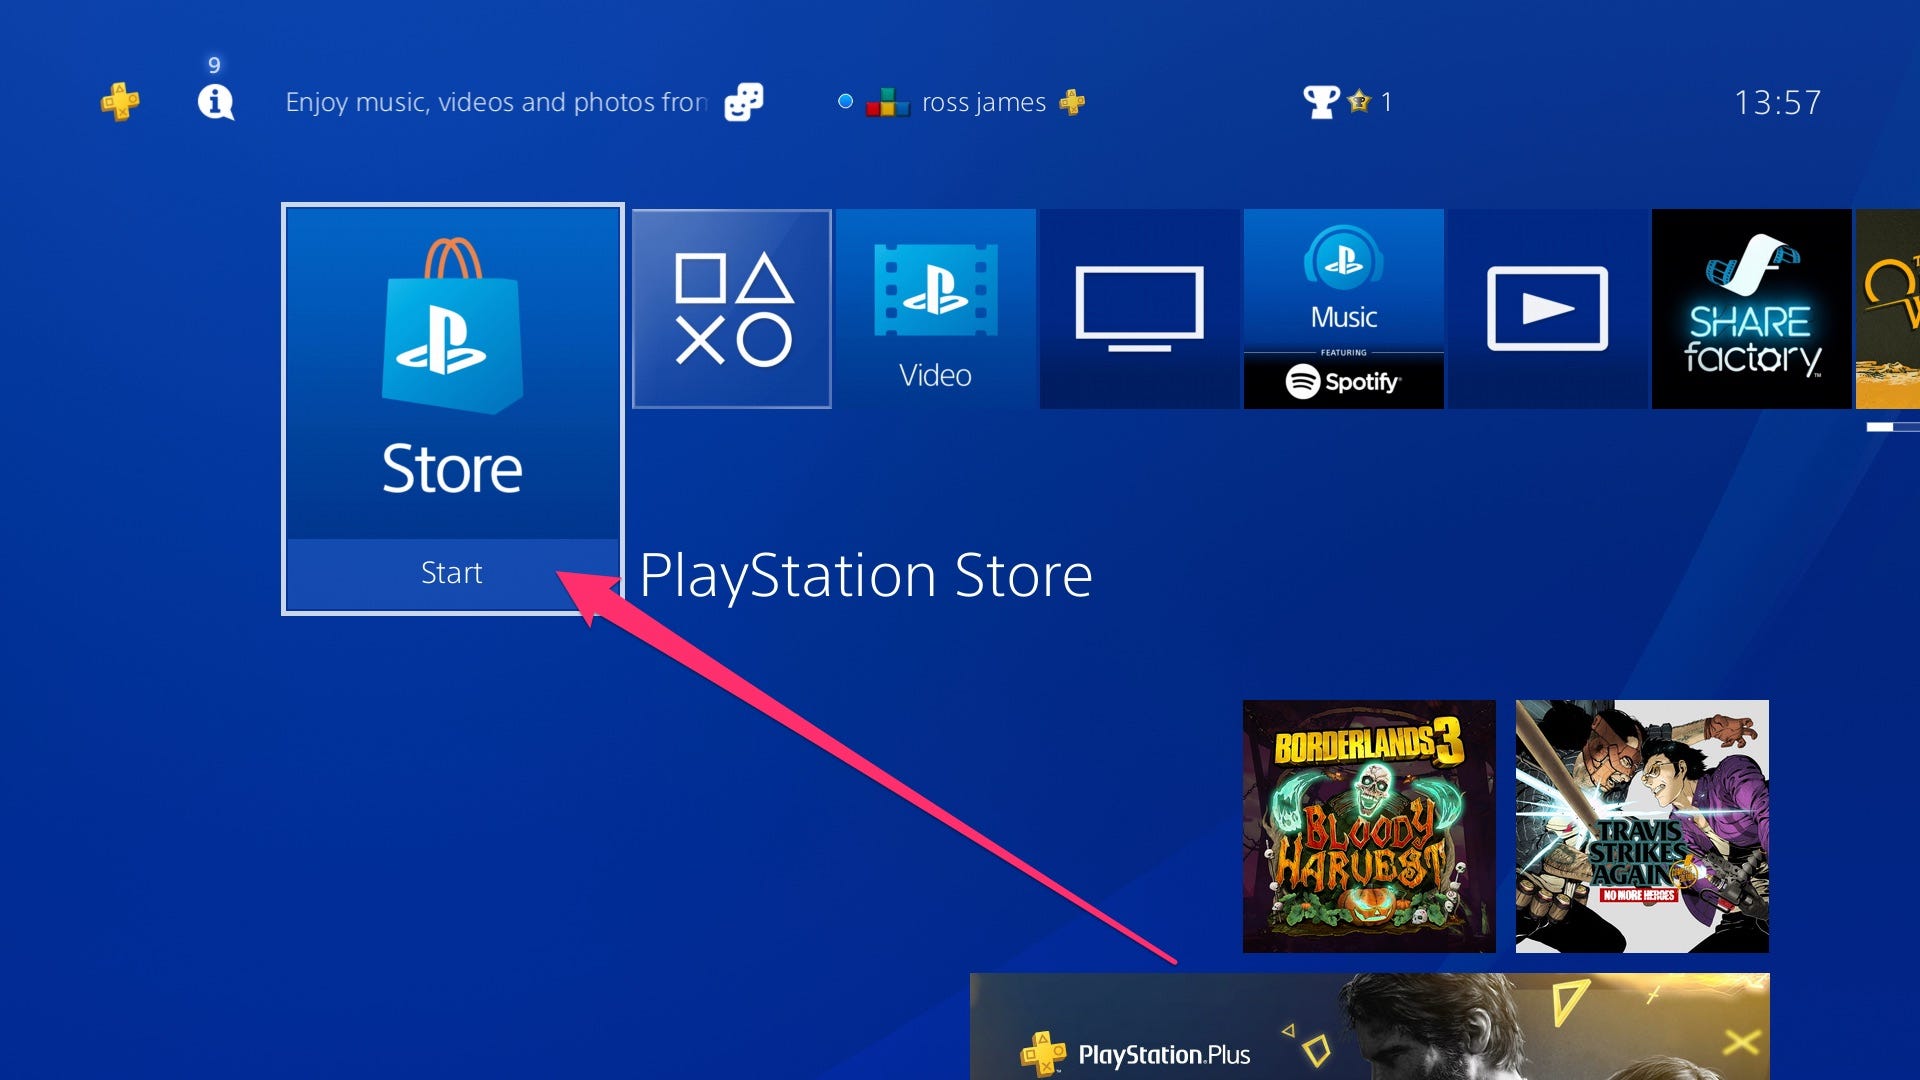 How to redeem code on PS4